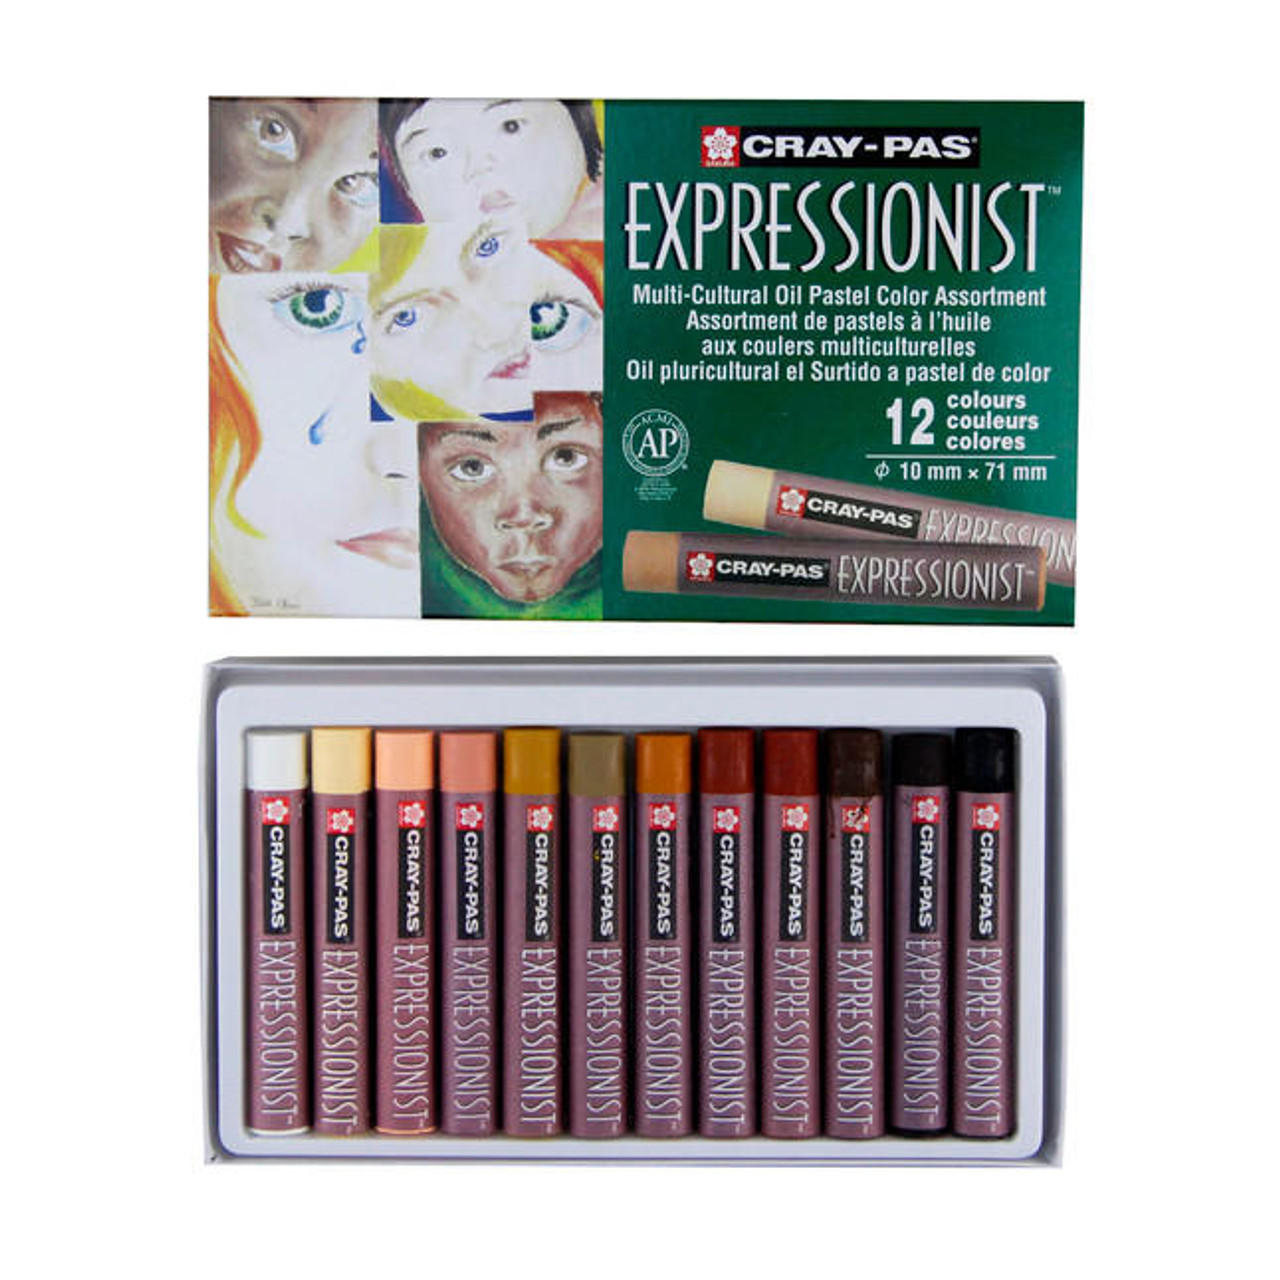 Cray-Pas Expressionist Oil Pastel Multicultural Set